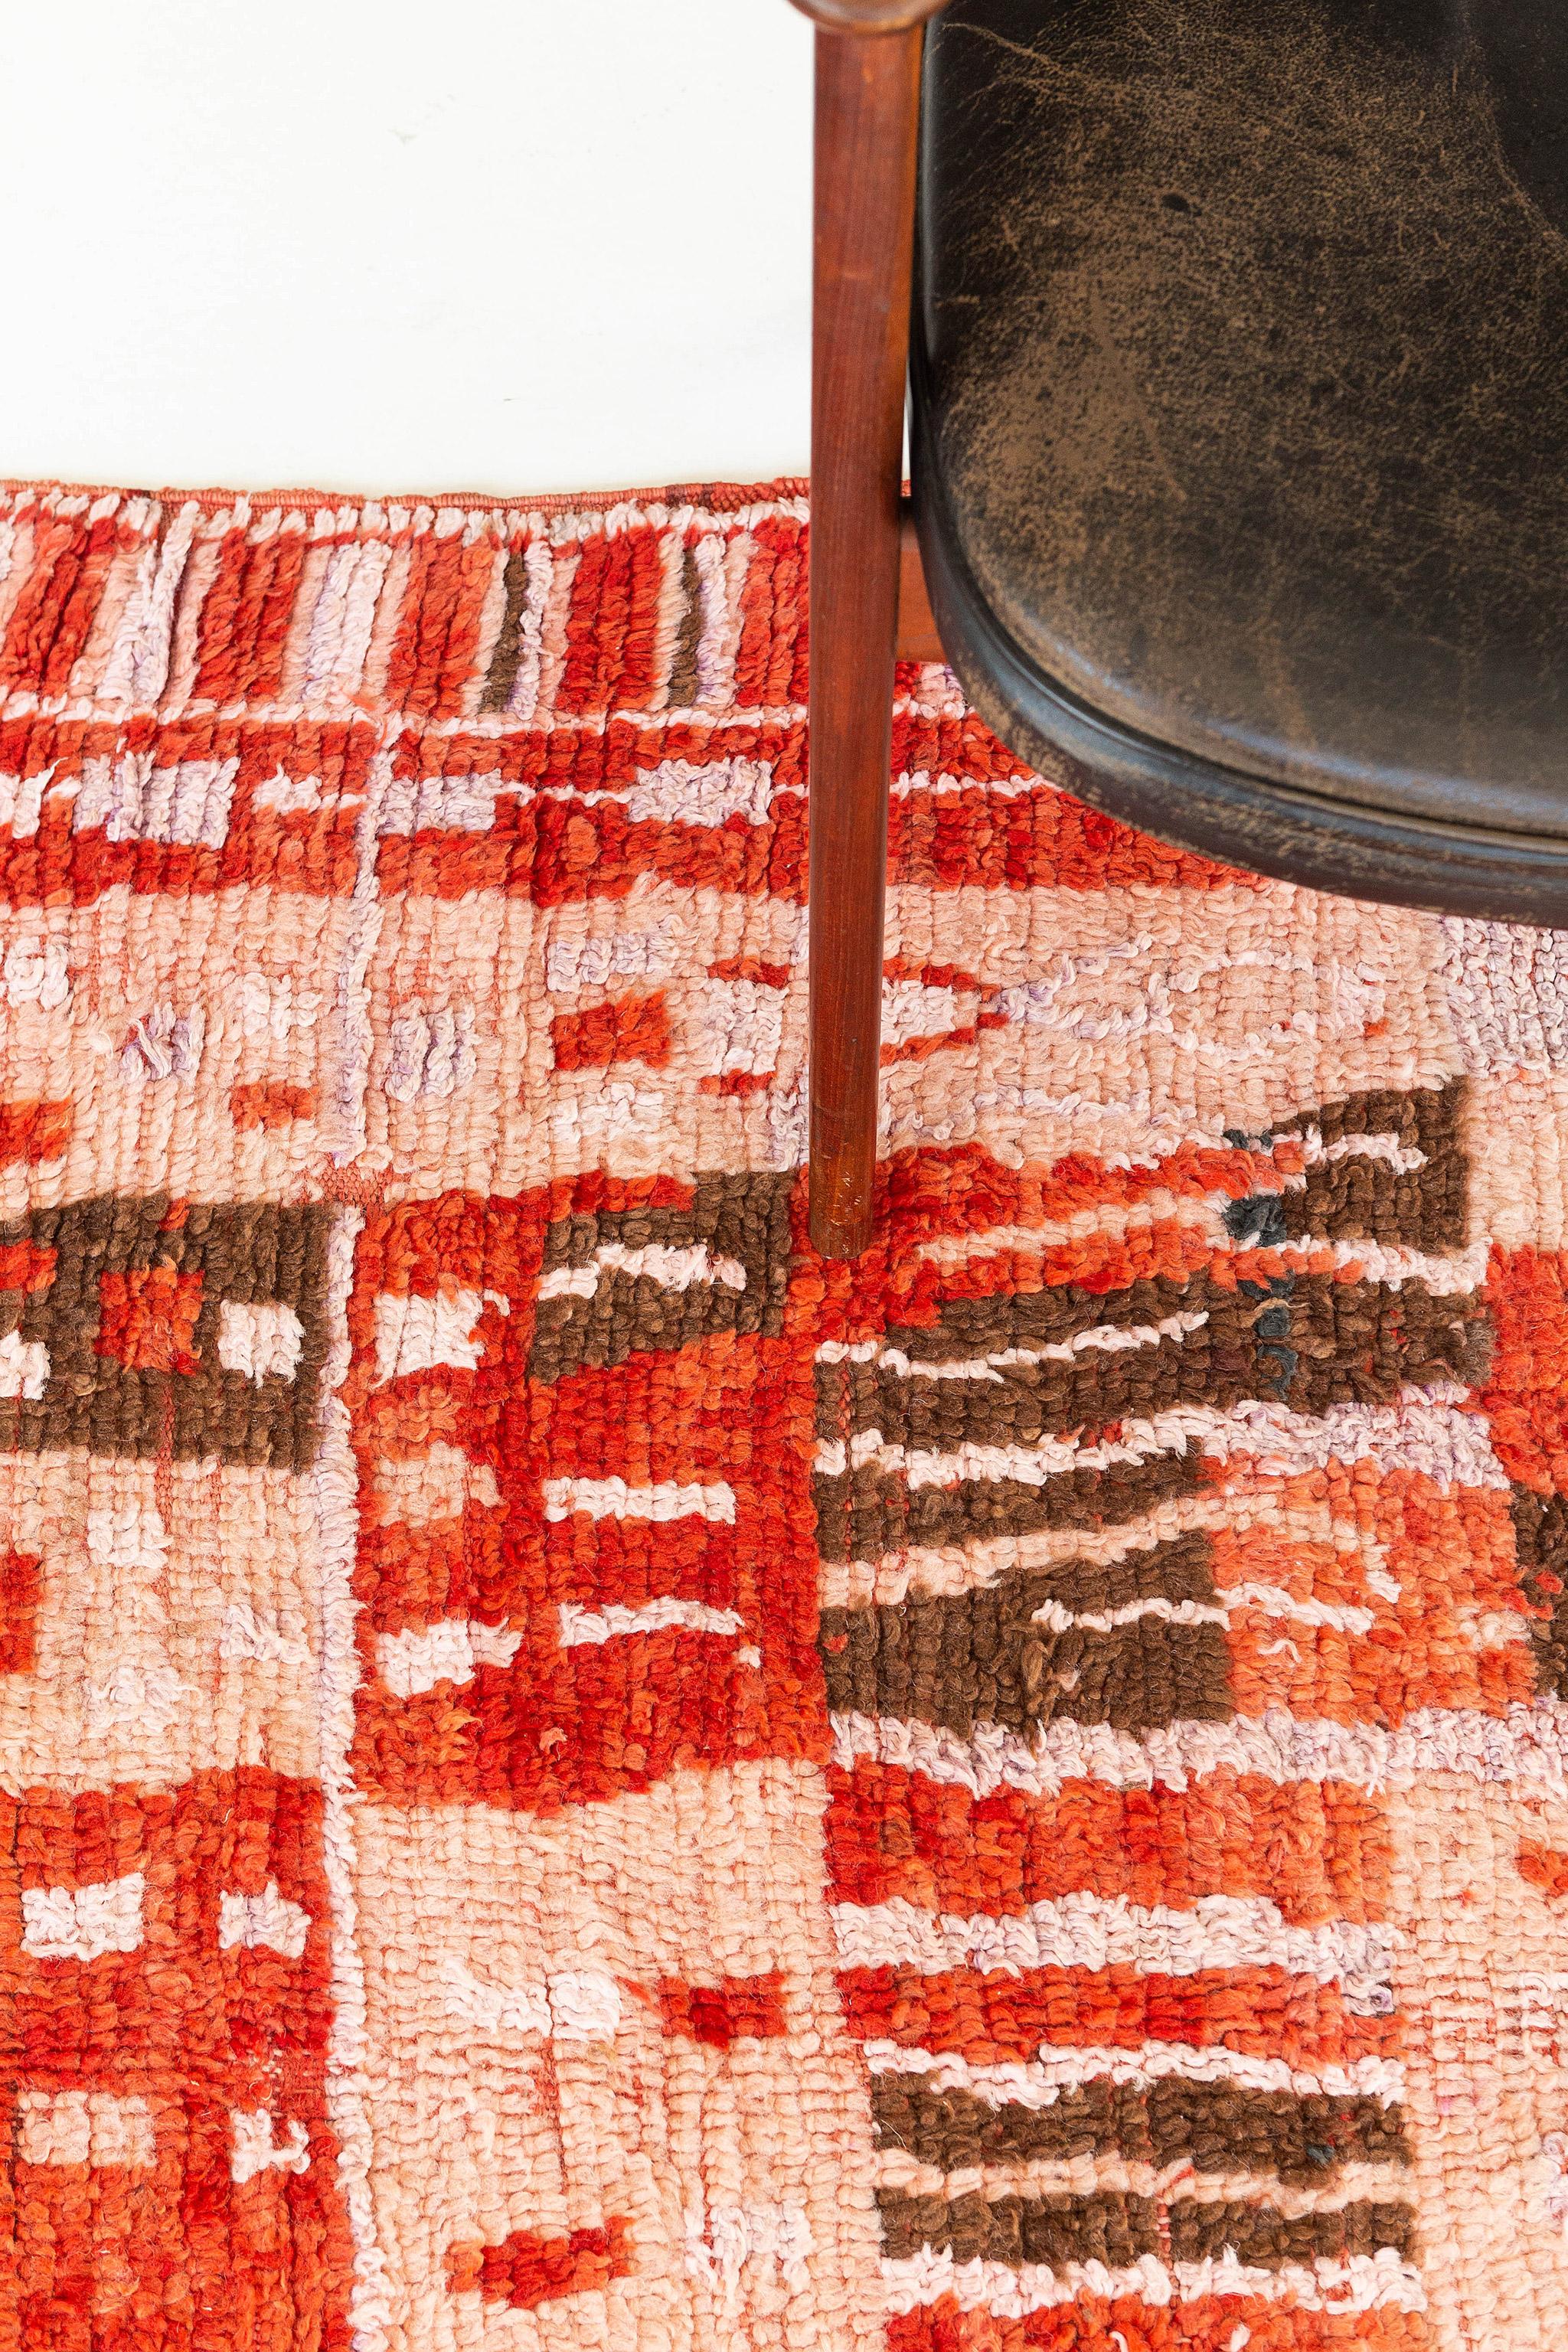 This artistic creation Berber Rug from Azilal Tribe has its beauty to modify your space into a traditional style. A centerpiece that fits your bedside decor. Vibrant colors such as red, coral orange, brown, and salmon pink are in a checkered pattern